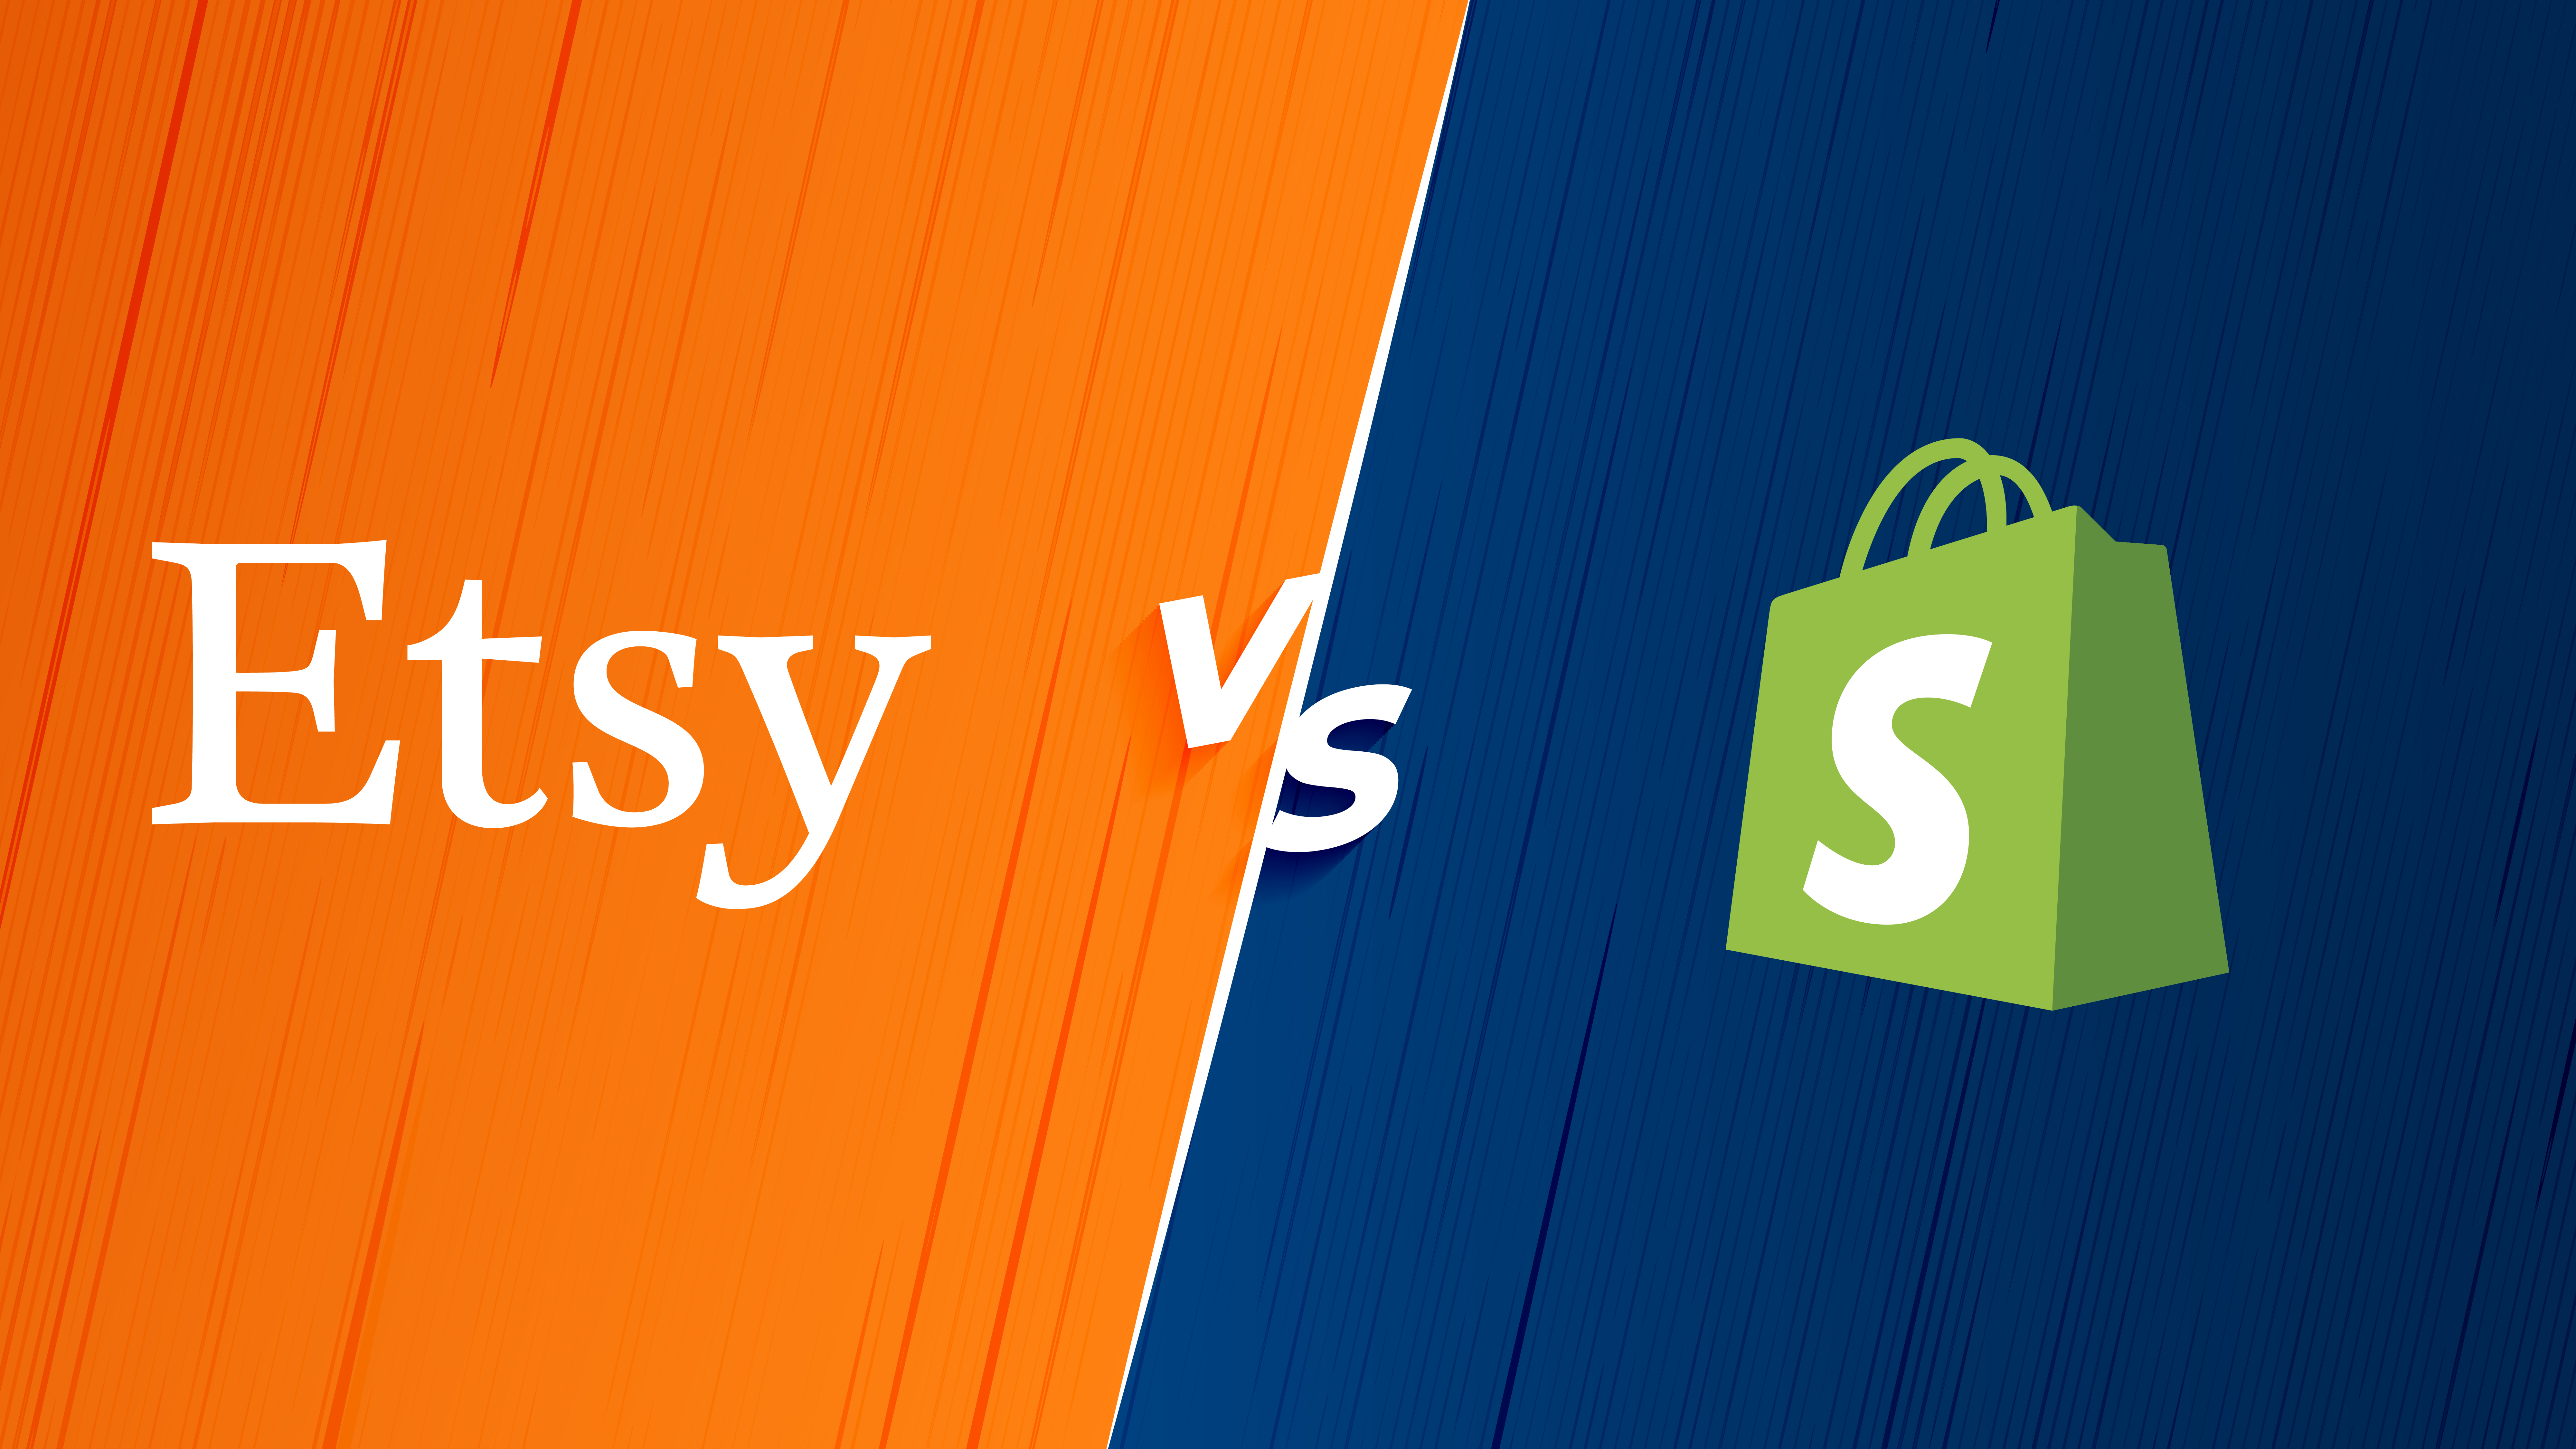 beehexa etsy vs shopify which is better 01